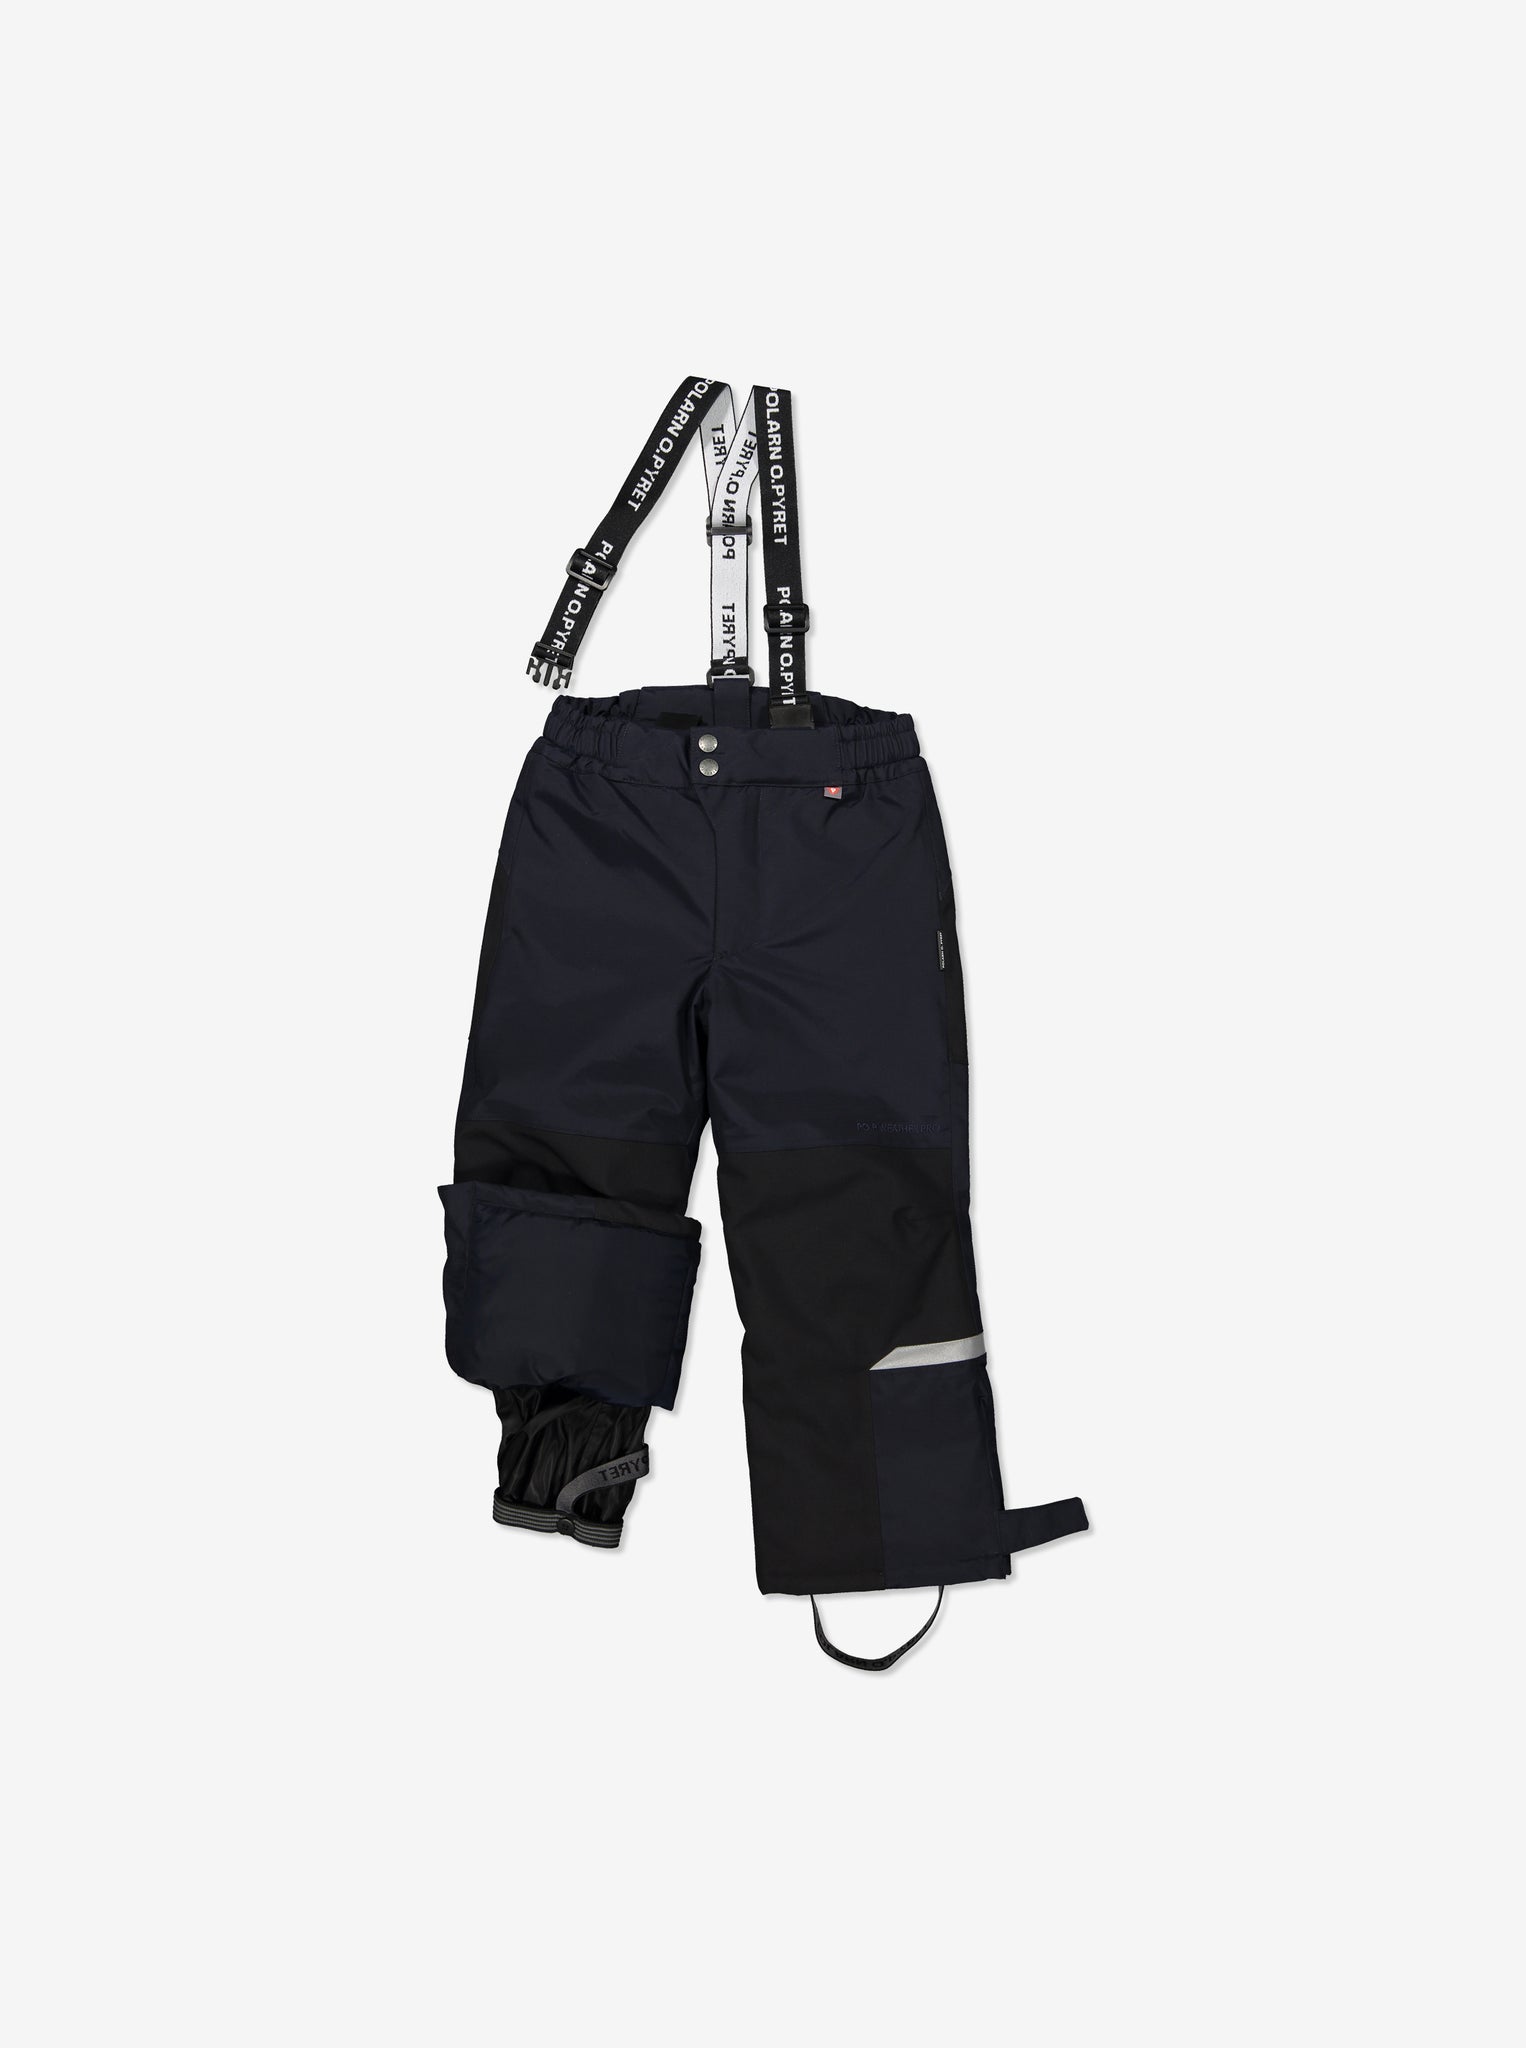 waterproof padded kids winter trousers, warm durable comfortable and long lasting, ethical kids clothes